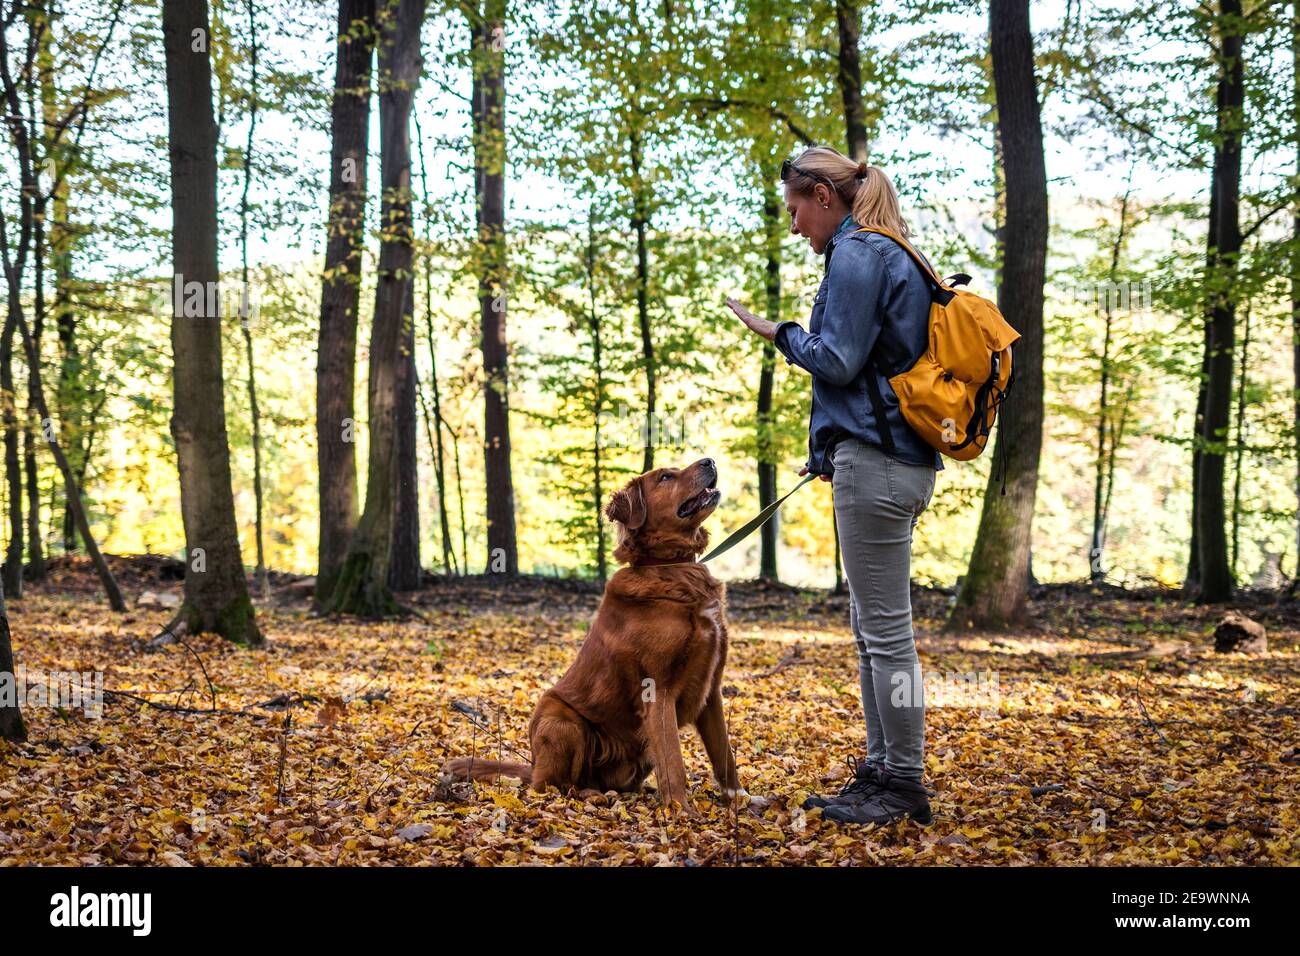 Animal trainer is doing obedience training with her dog outdoors. Female pet owner and retriever in nature. Hiking woman with backpack and dog Stock Photo